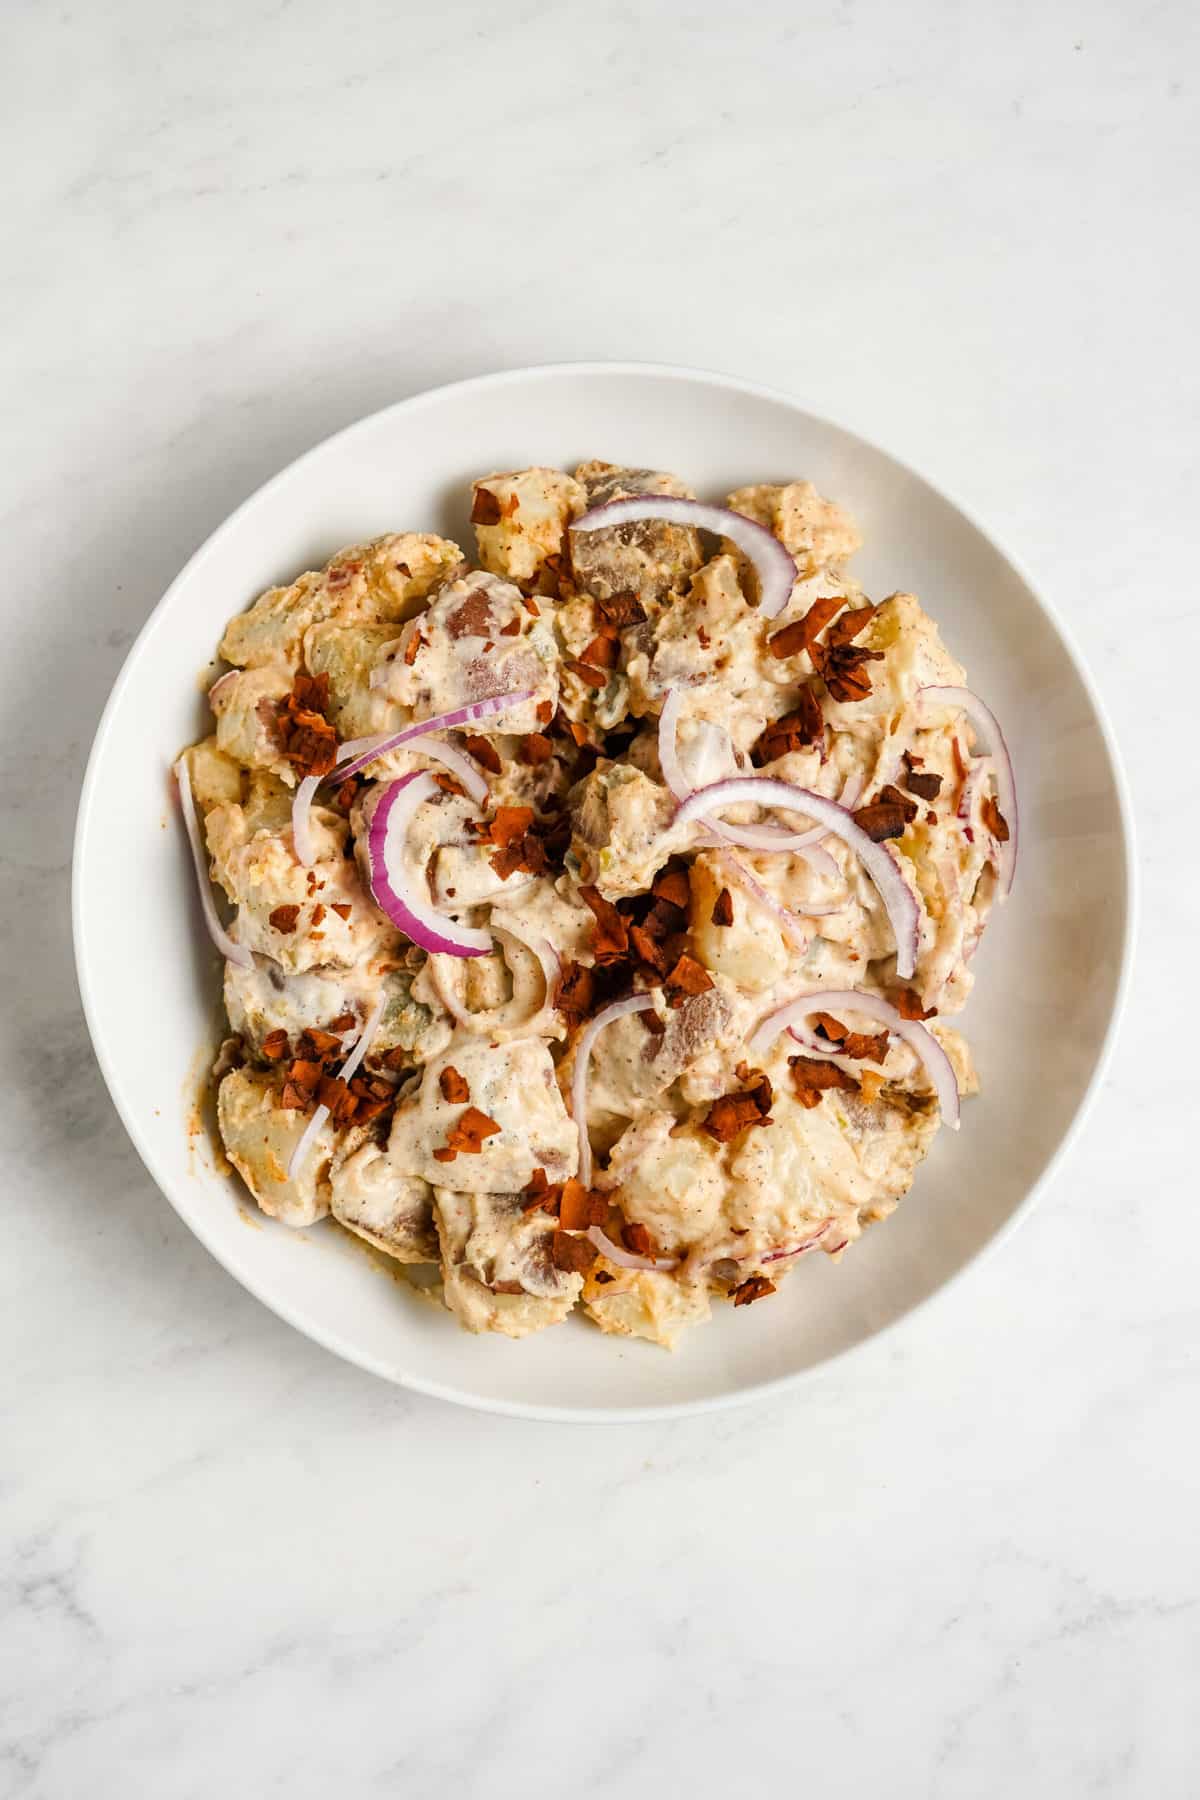 A plate of creamy potato salad with red onions.